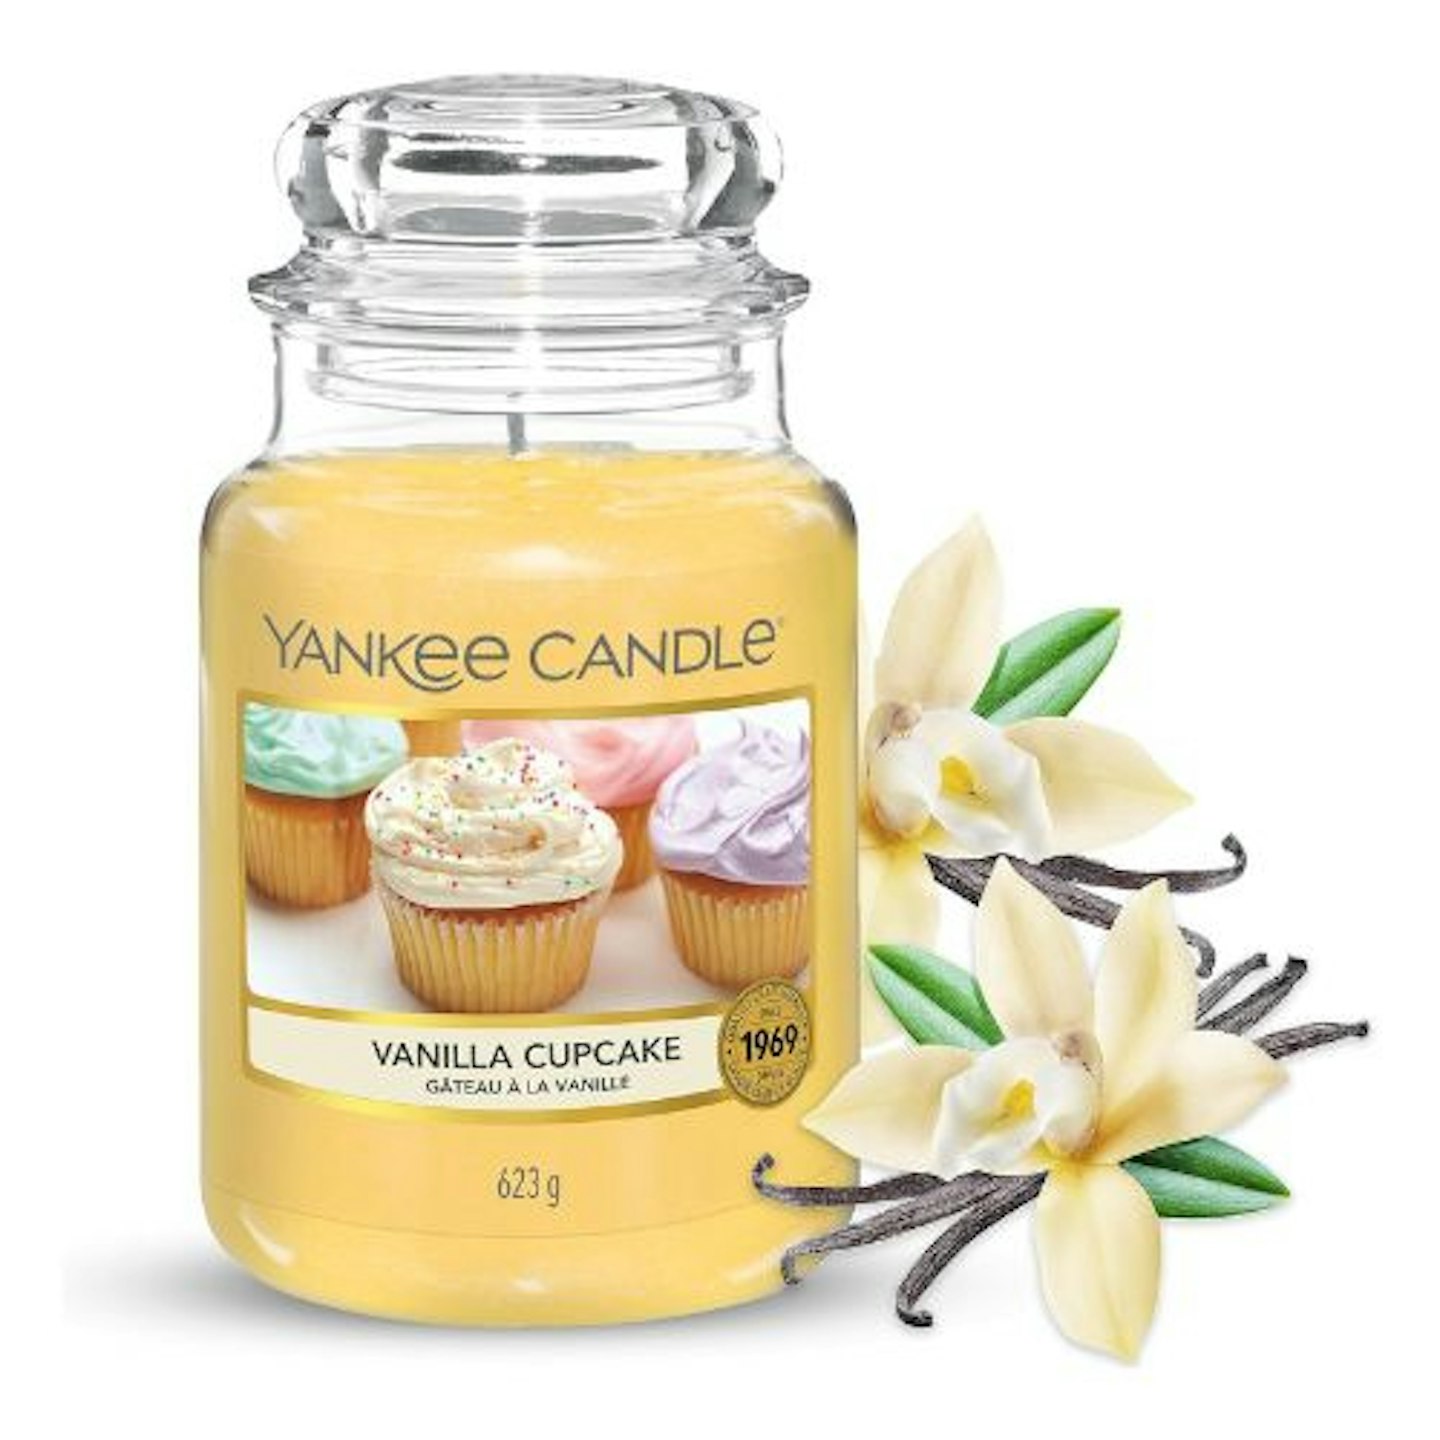  Yankee Candle Scented Candle | Vanilla Cupcake Large Jar Candle | Long Burning Candles: up to 150 Hours